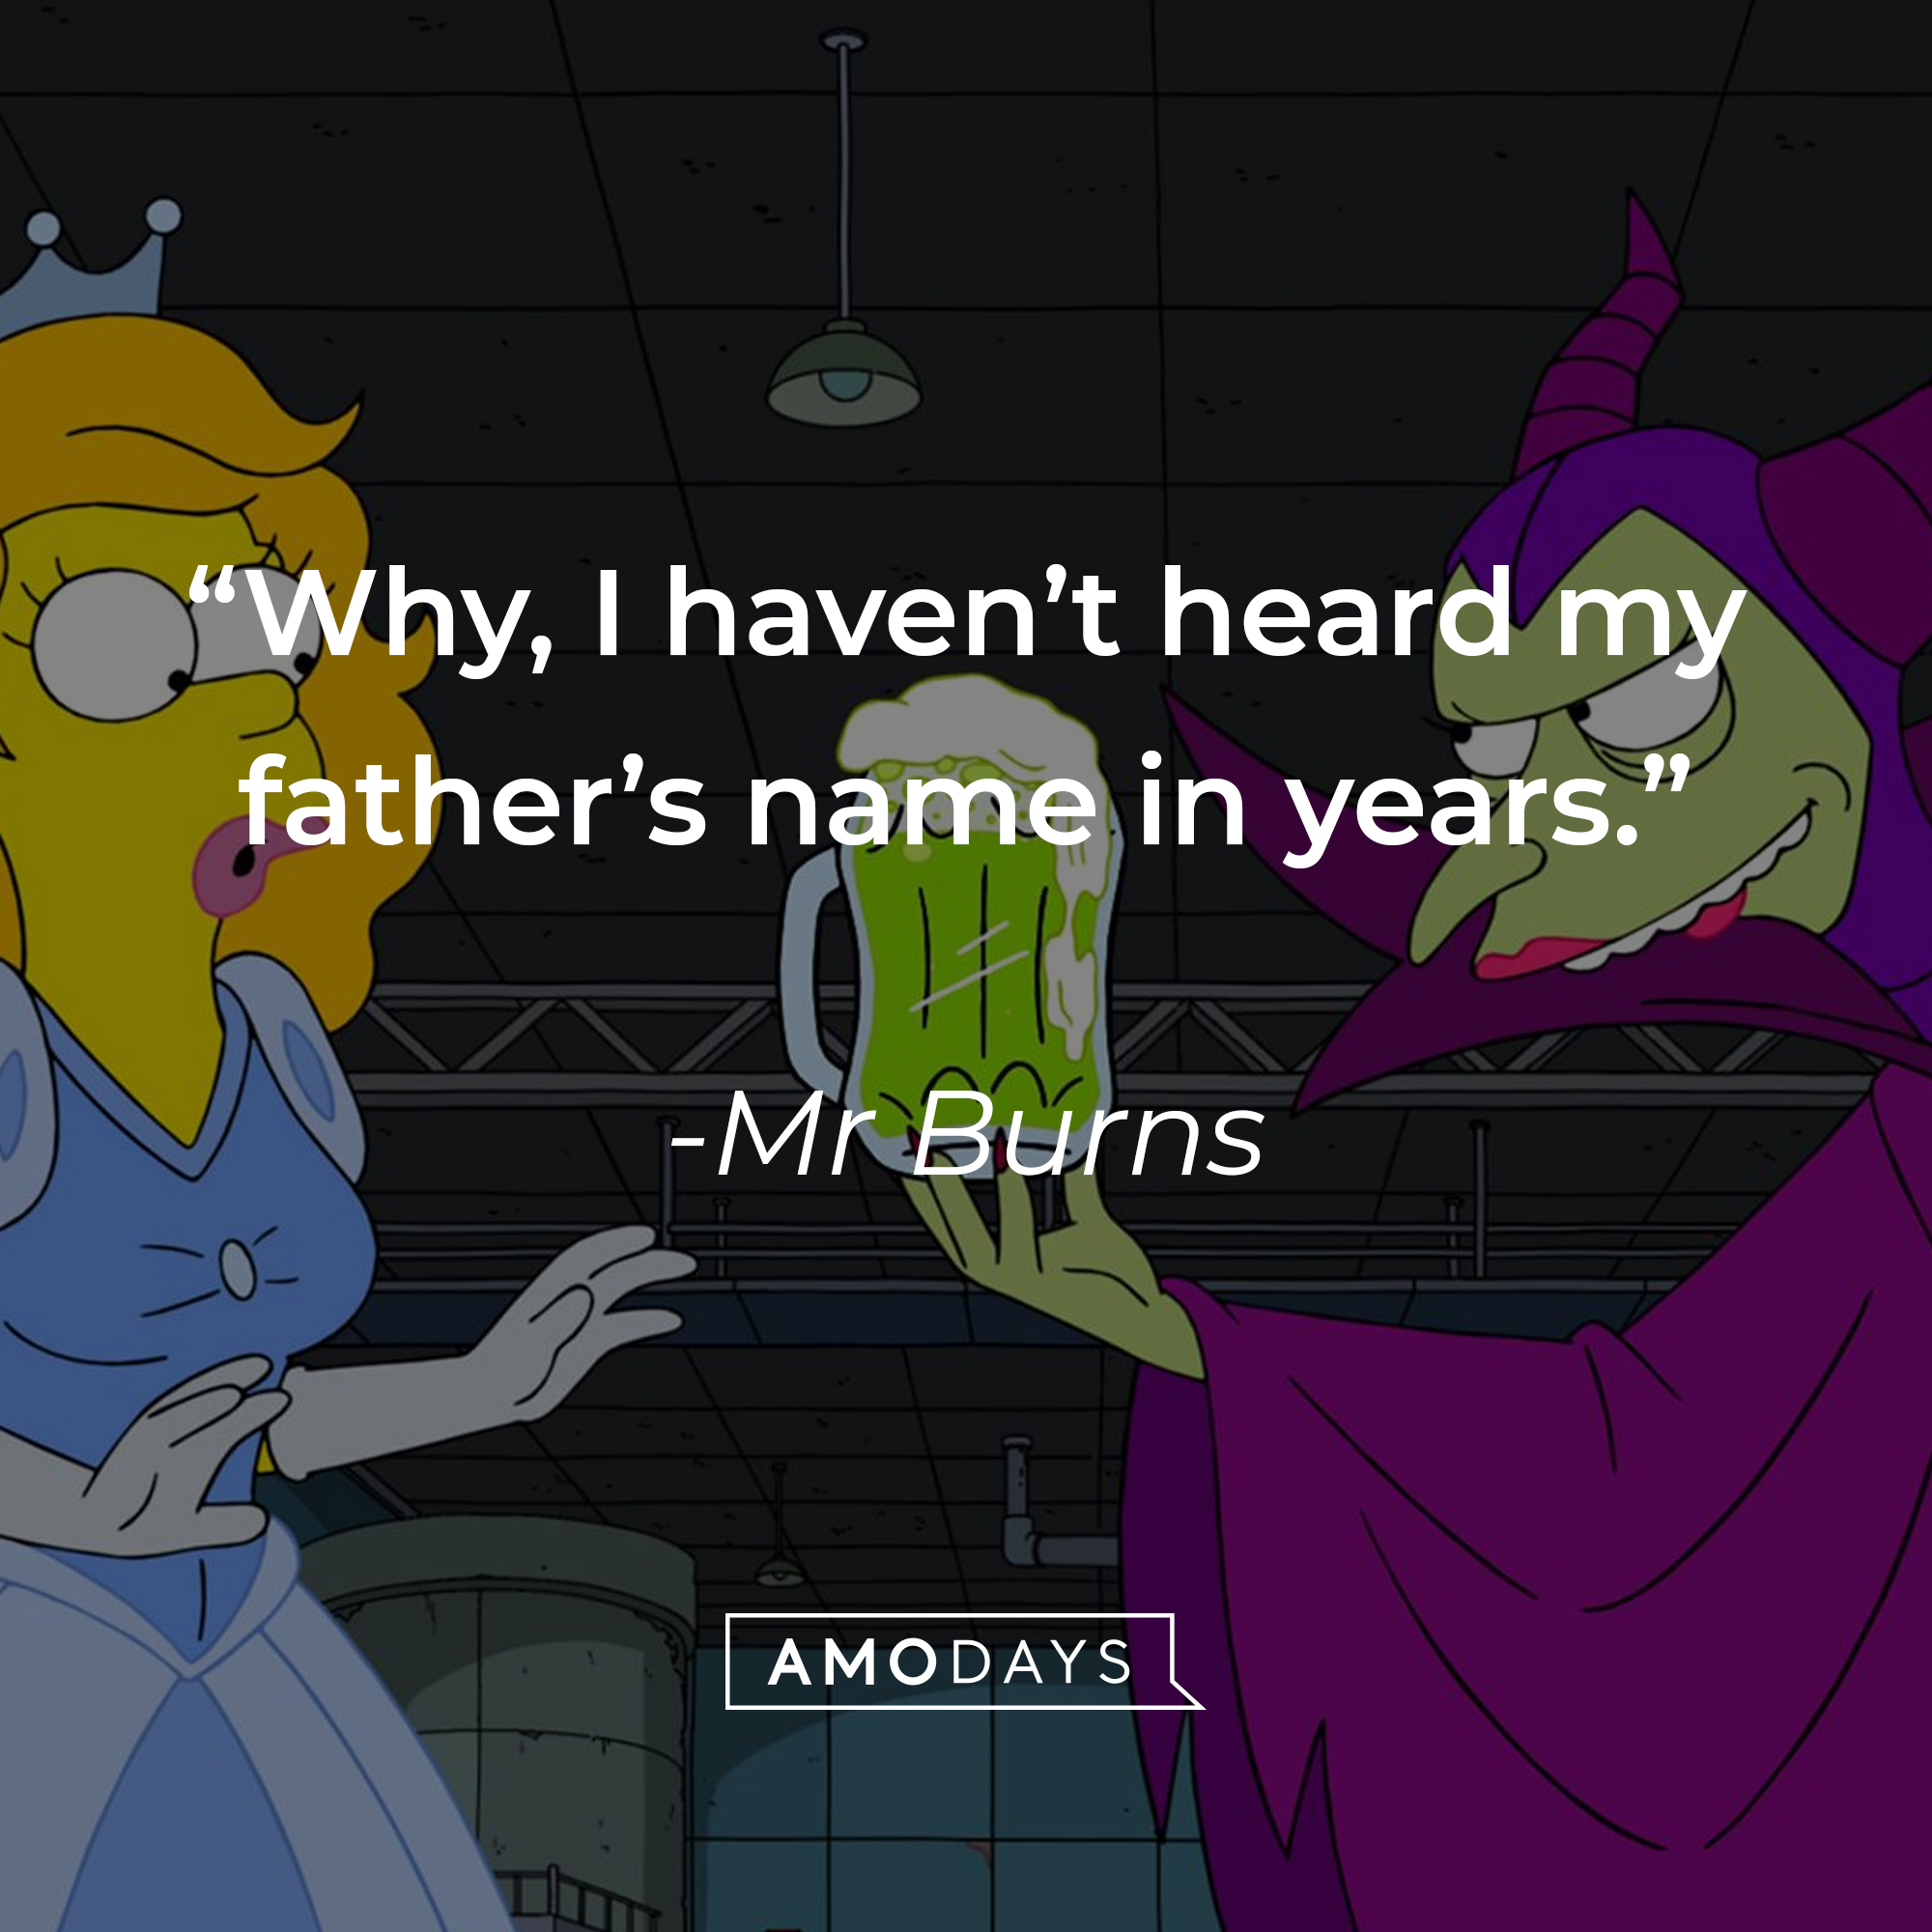 Mr. Burns' quote: "Why, I haven't heard my father's name in years." | Source: facebook.com/TheSimpsons